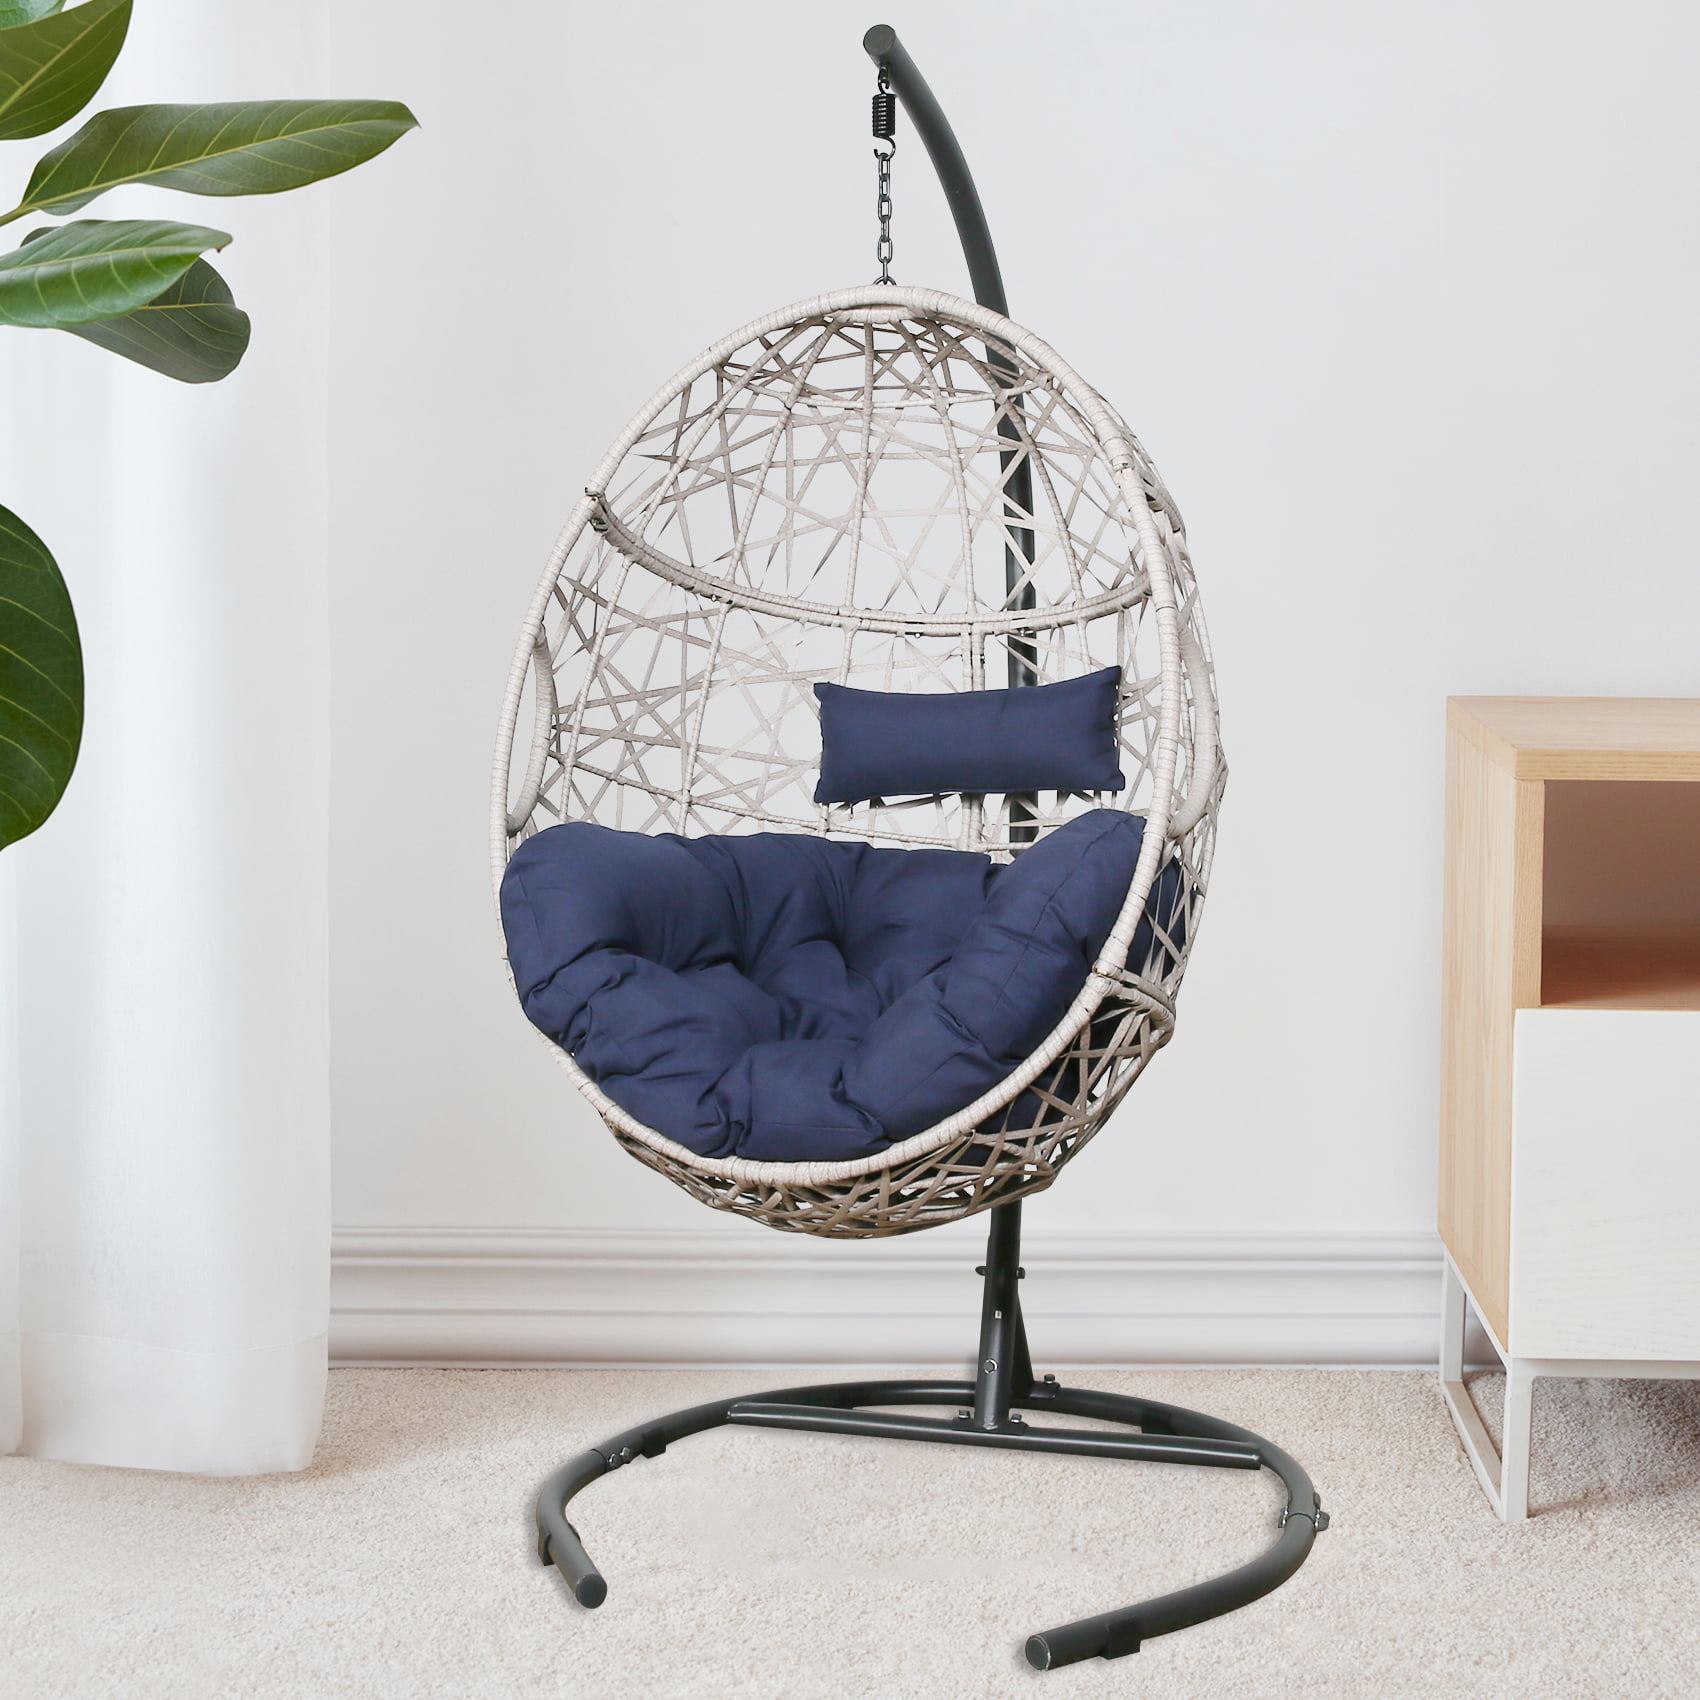 Navy Ulax furniture Outdoor Patio Wicker Hanging Basket Swing Chair Tear Drop Egg Chair with Cushion and Stand 